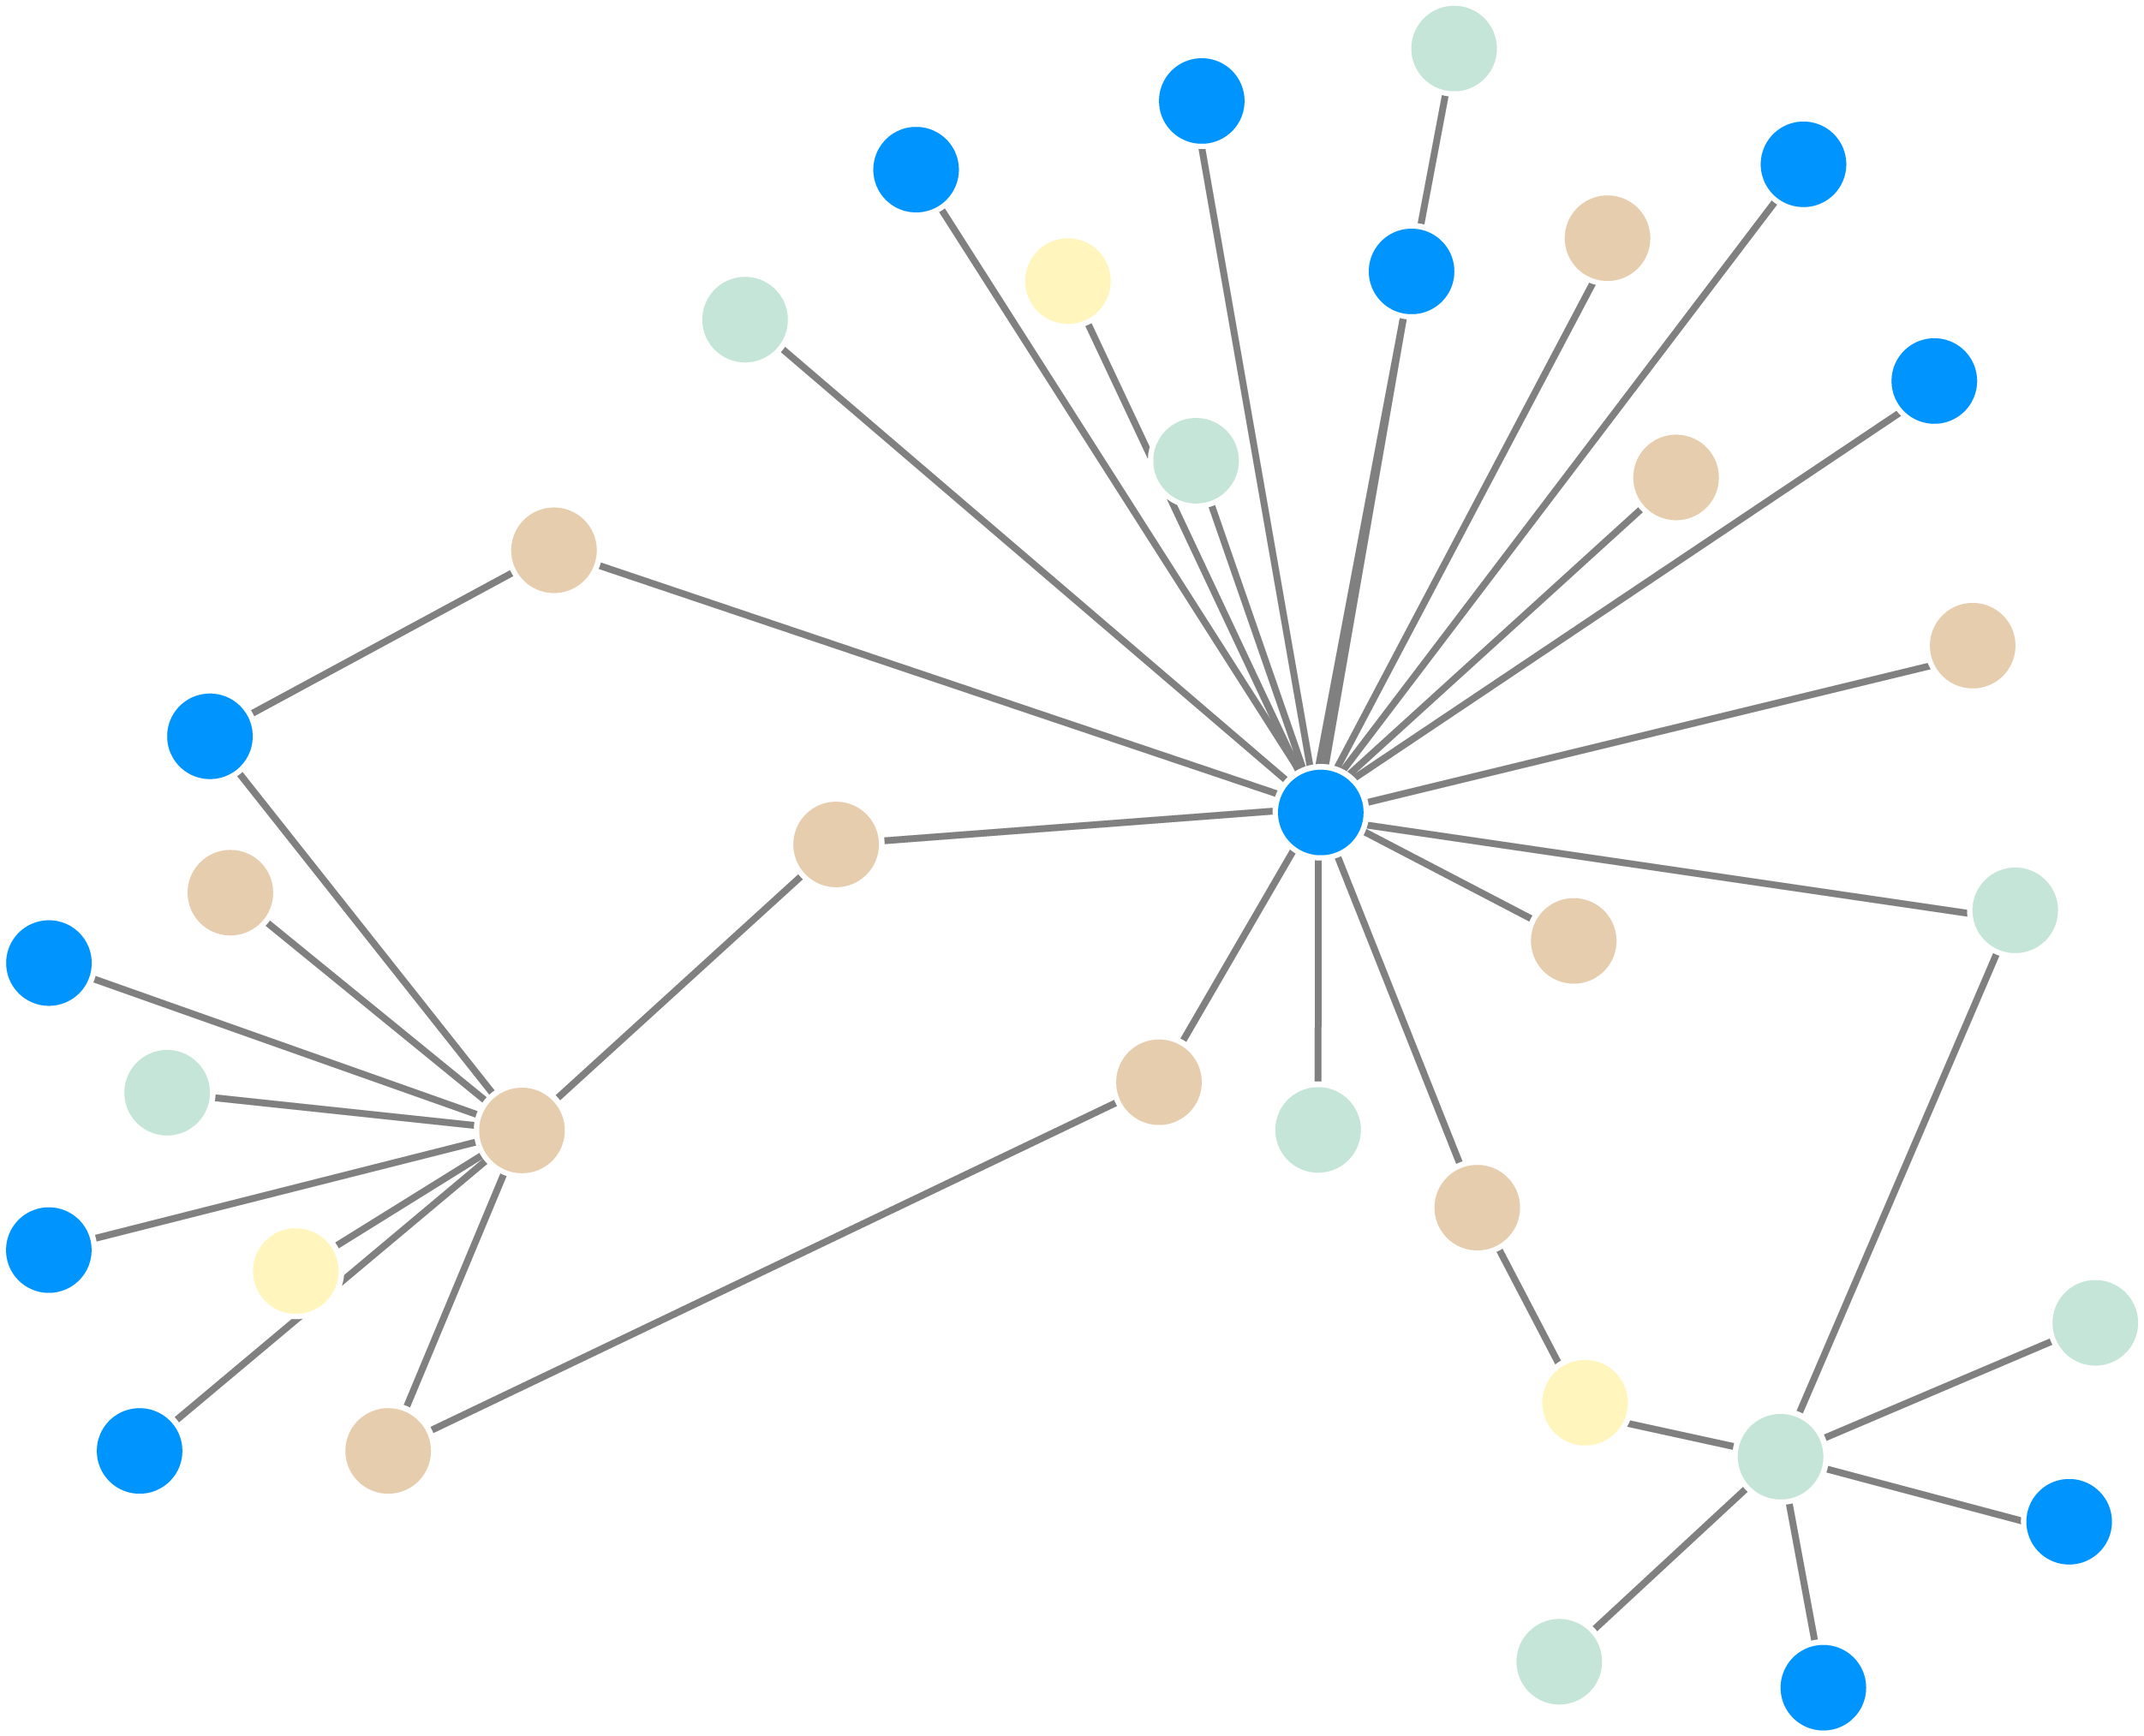 Visualization of a centrality graph algorithm with forced direction layout